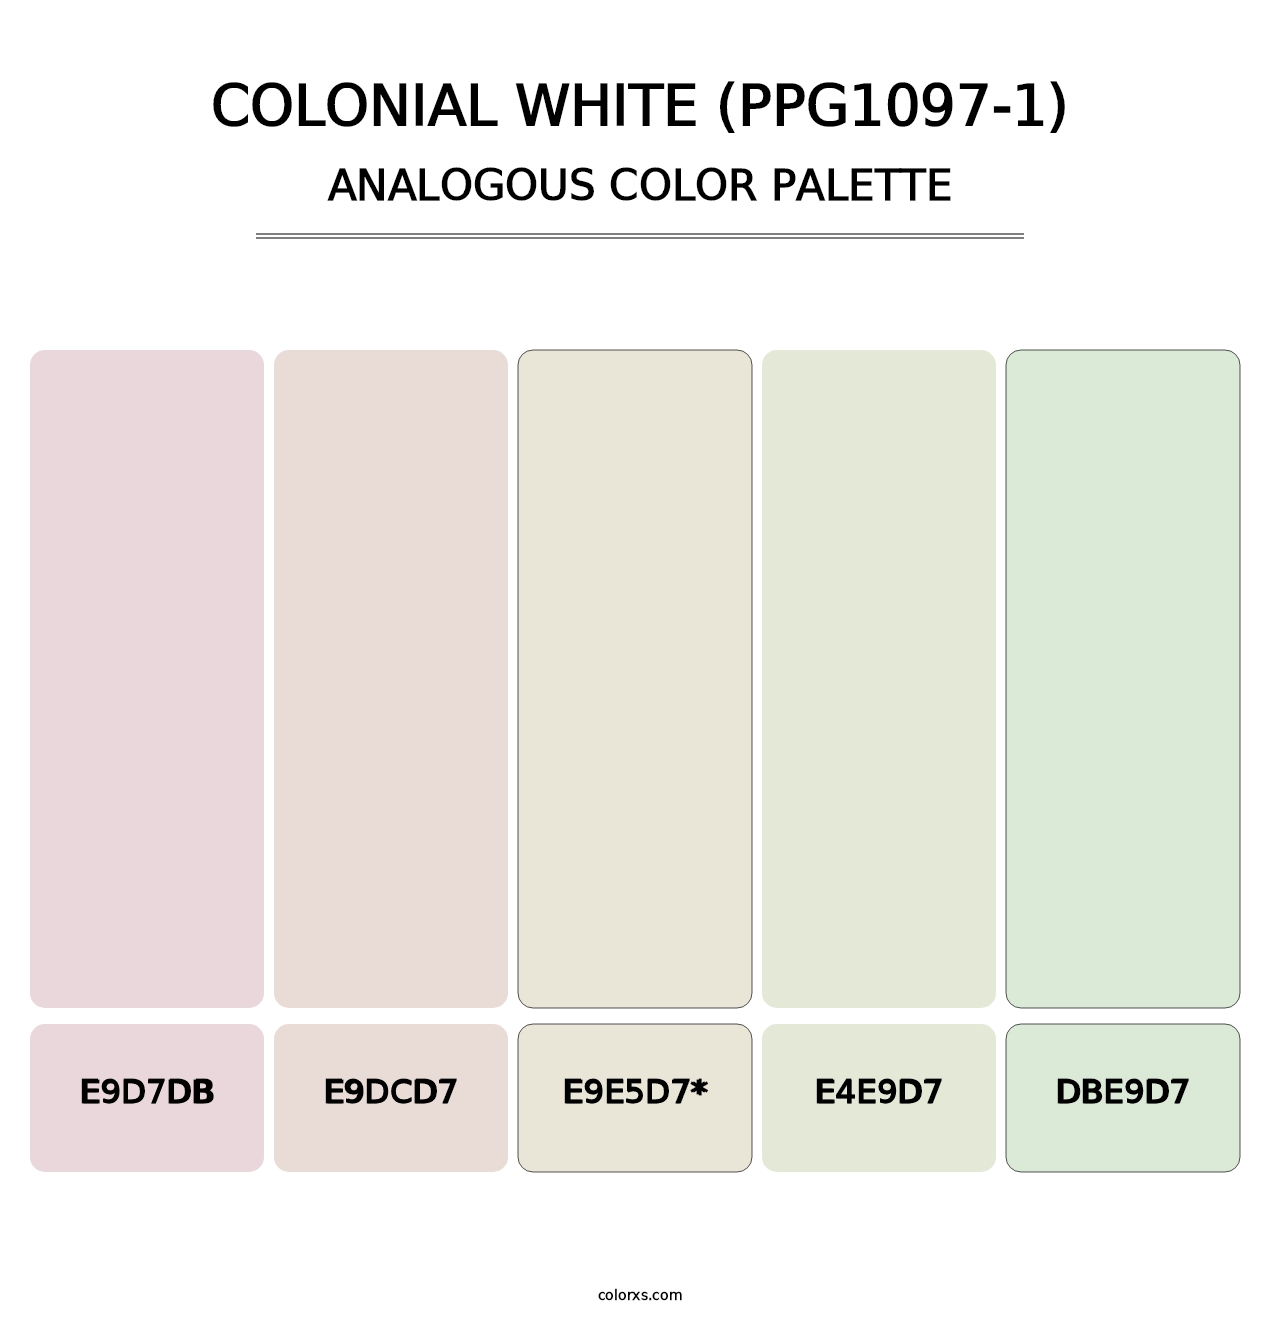 Colonial White (PPG1097-1) - Analogous Color Palette